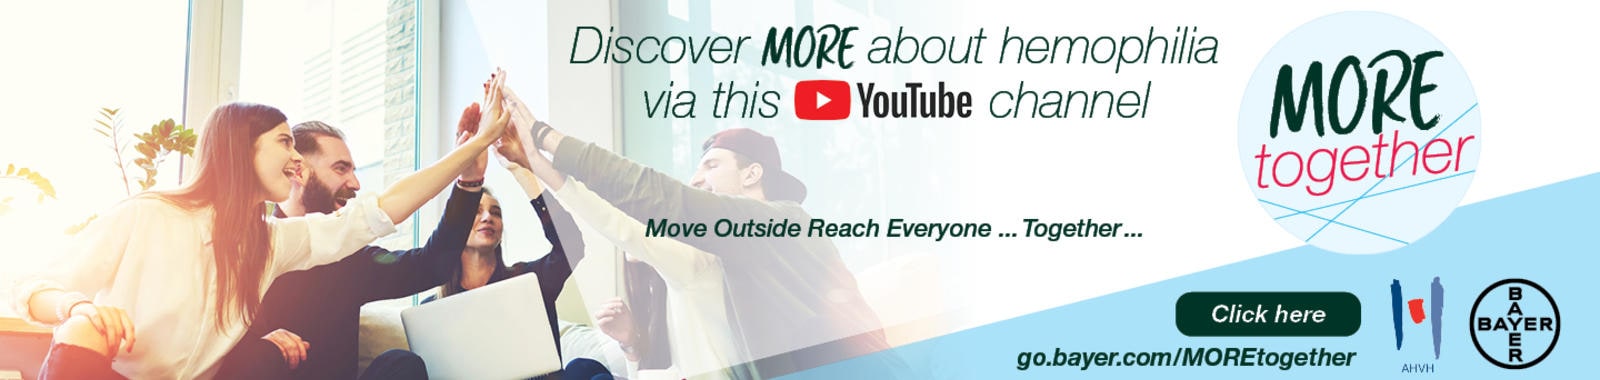 Visit our YouTube channel MORE together